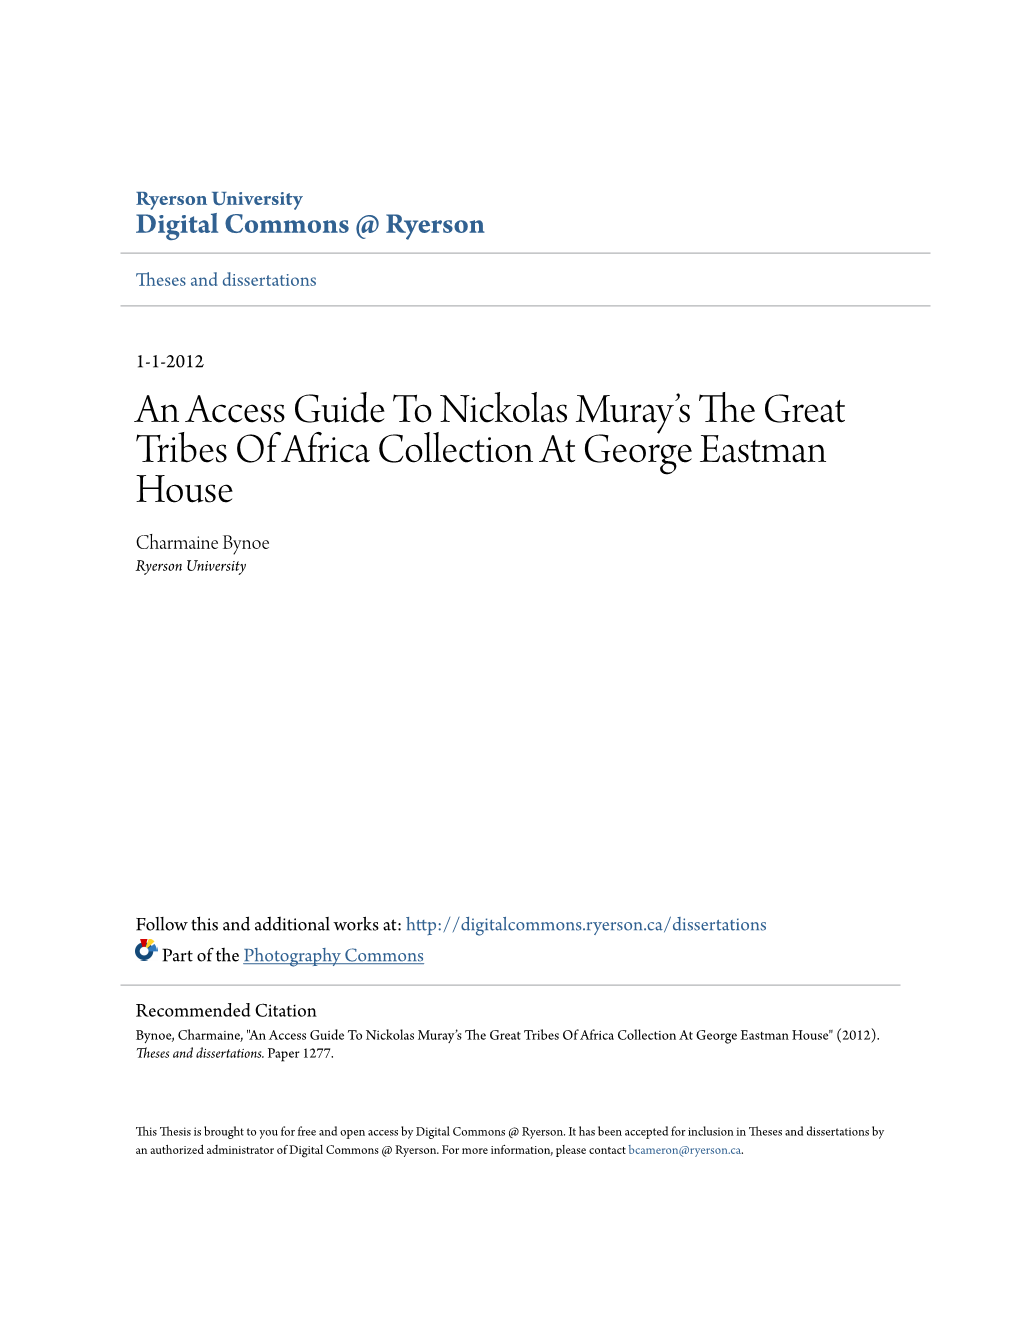 An Access Guide to Nickolas Murayâ•Žs the Great Tribes of Africa